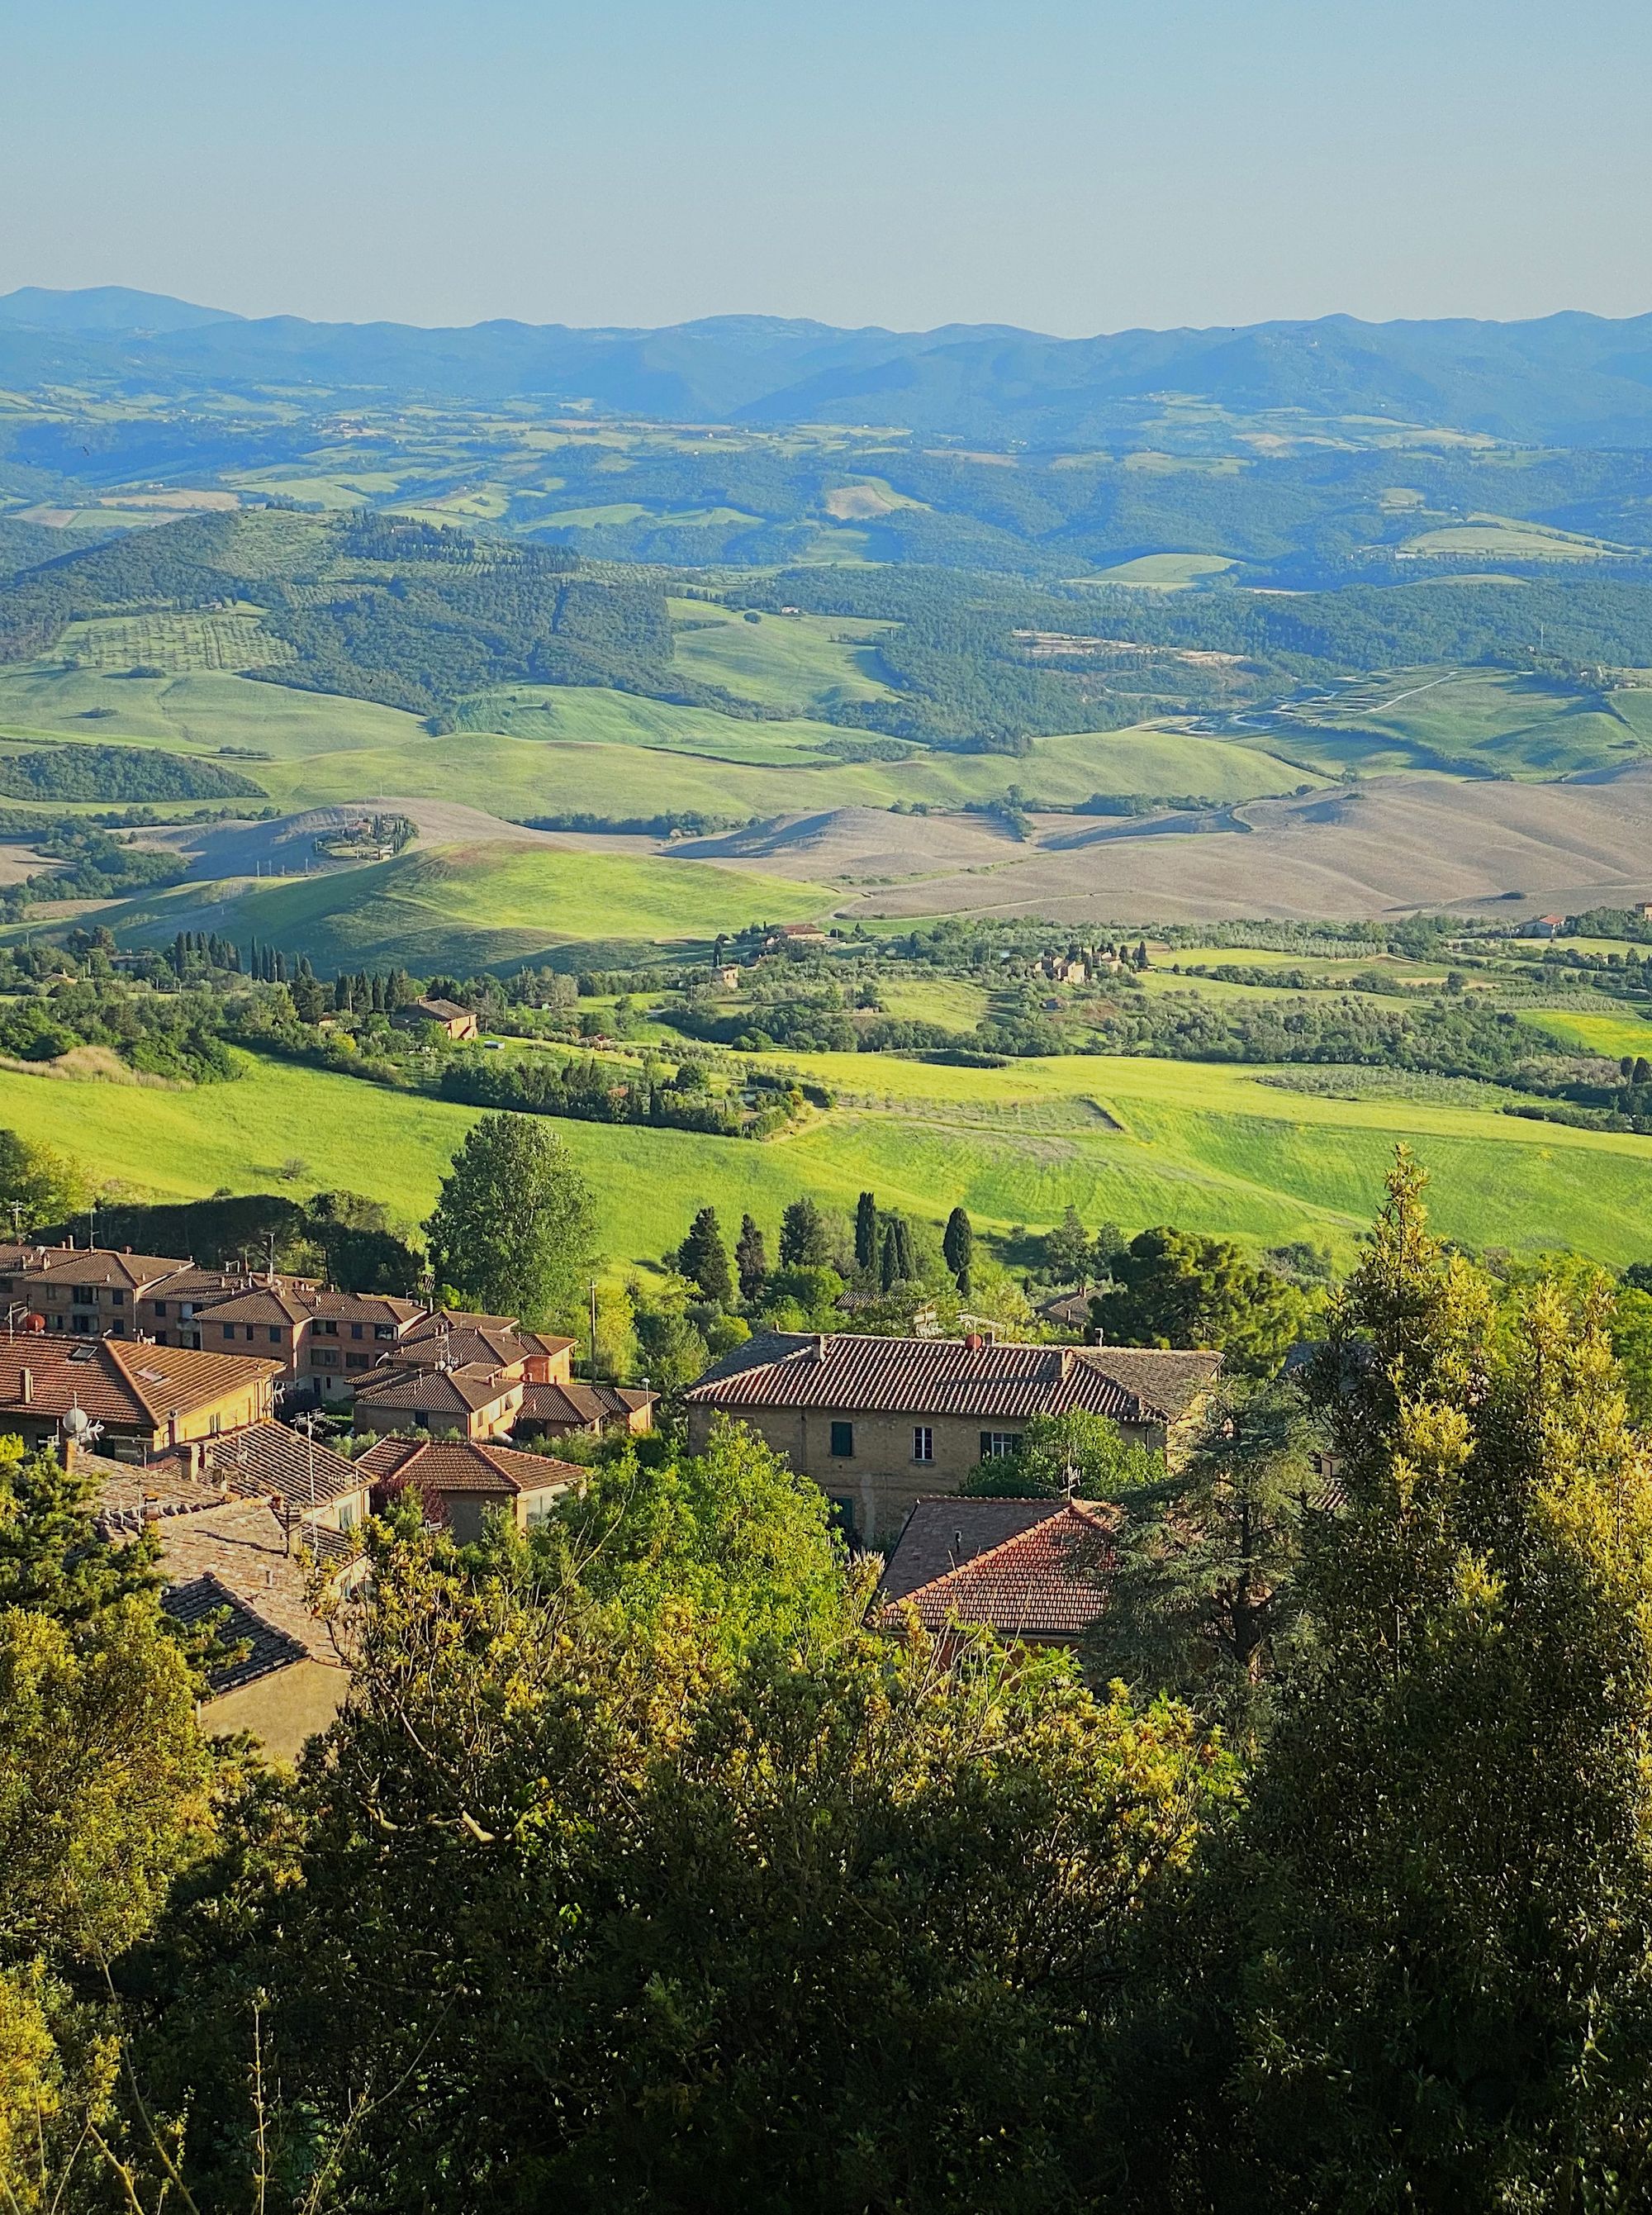 The rolling hills of Tuscany, seen from Volterra, Italy - spring road trip 2022